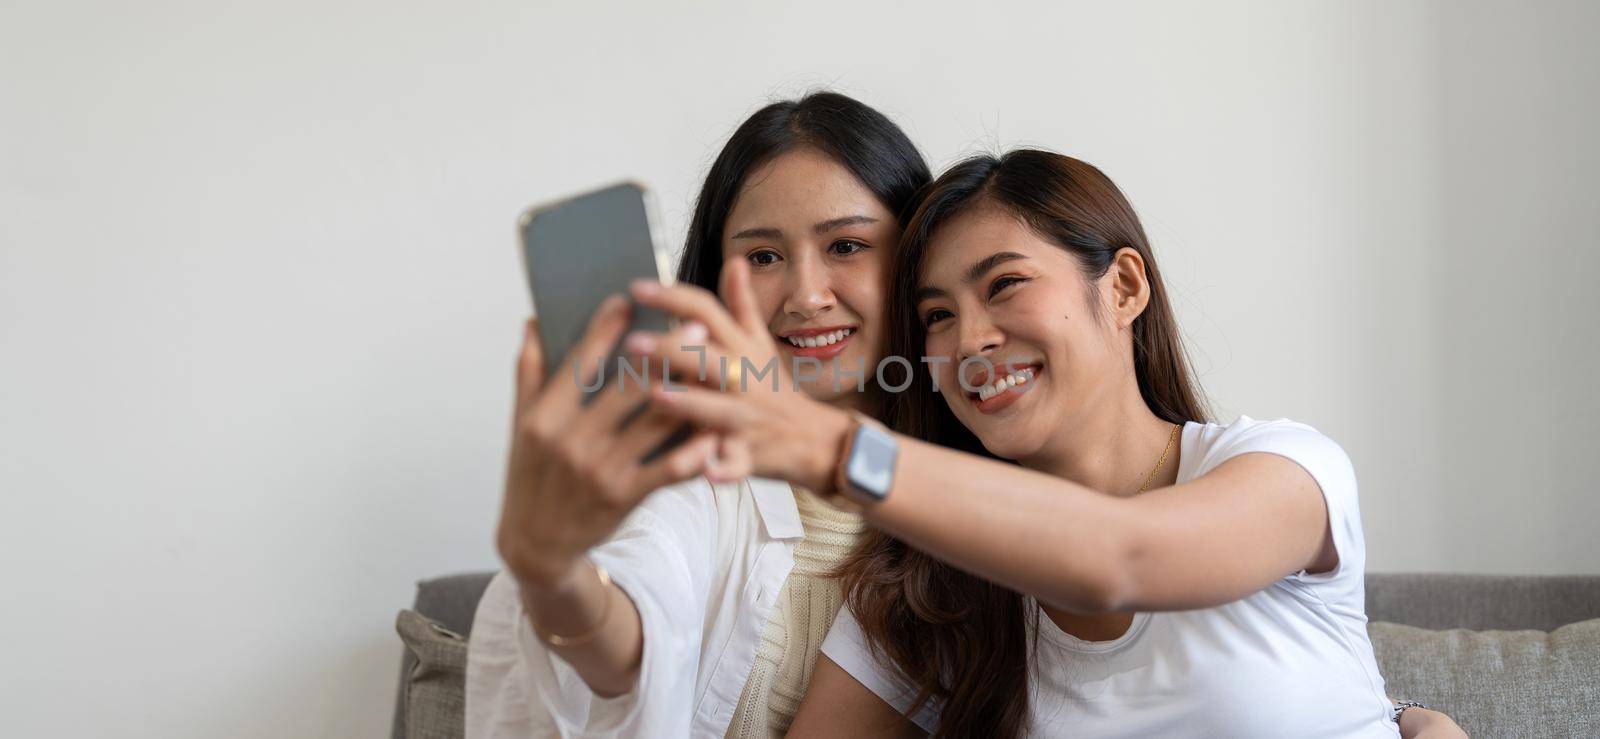 Asian beautiful lesbian or friends using mobile phone to take selfie together on couch. LGBT, Technology and Lifestyle Concept. by nateemee